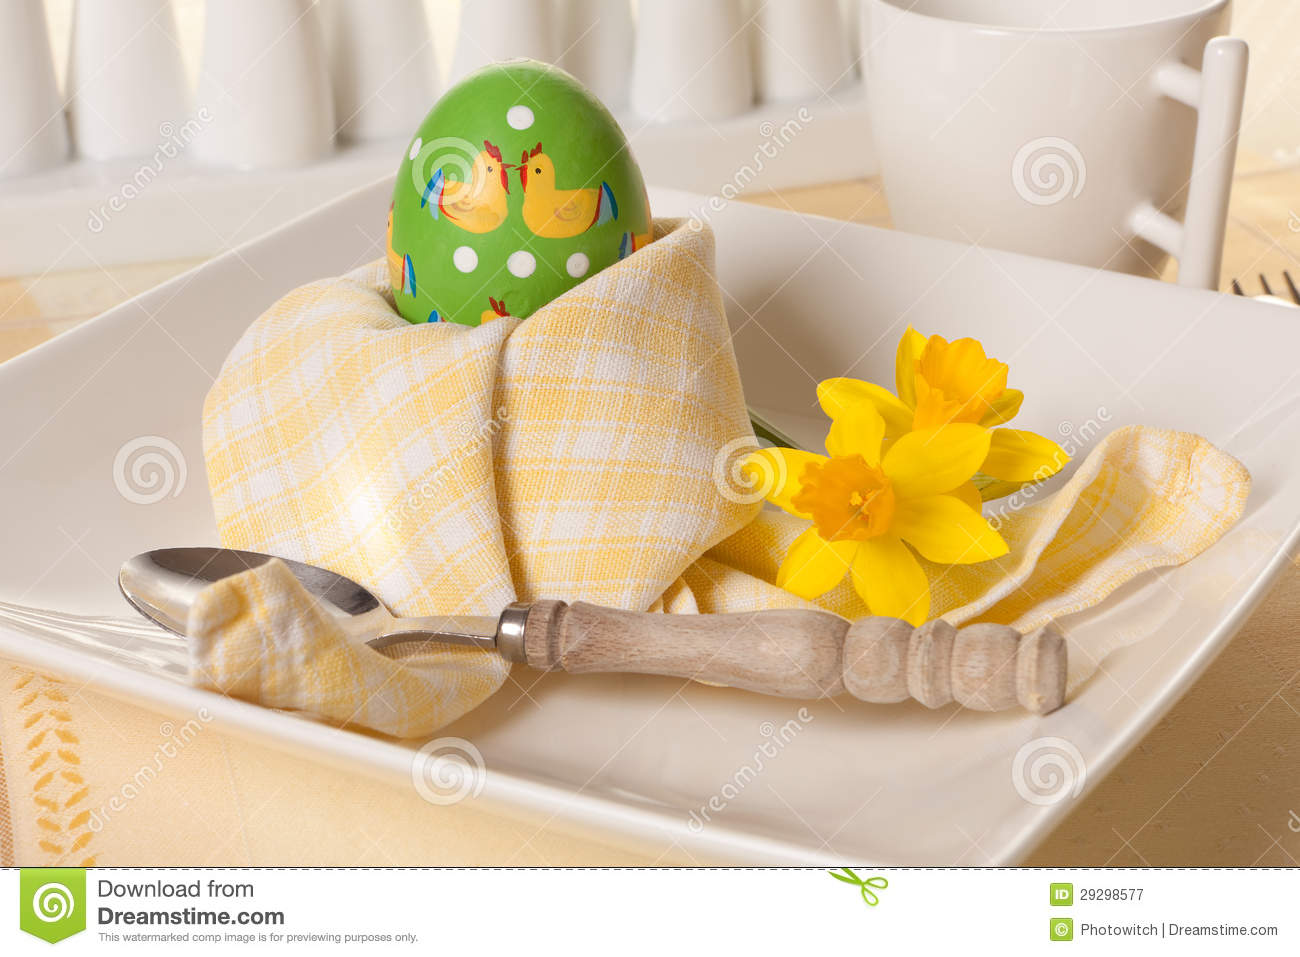 Easter Breakfast Napkins Royalty Free Stock Photography   Image